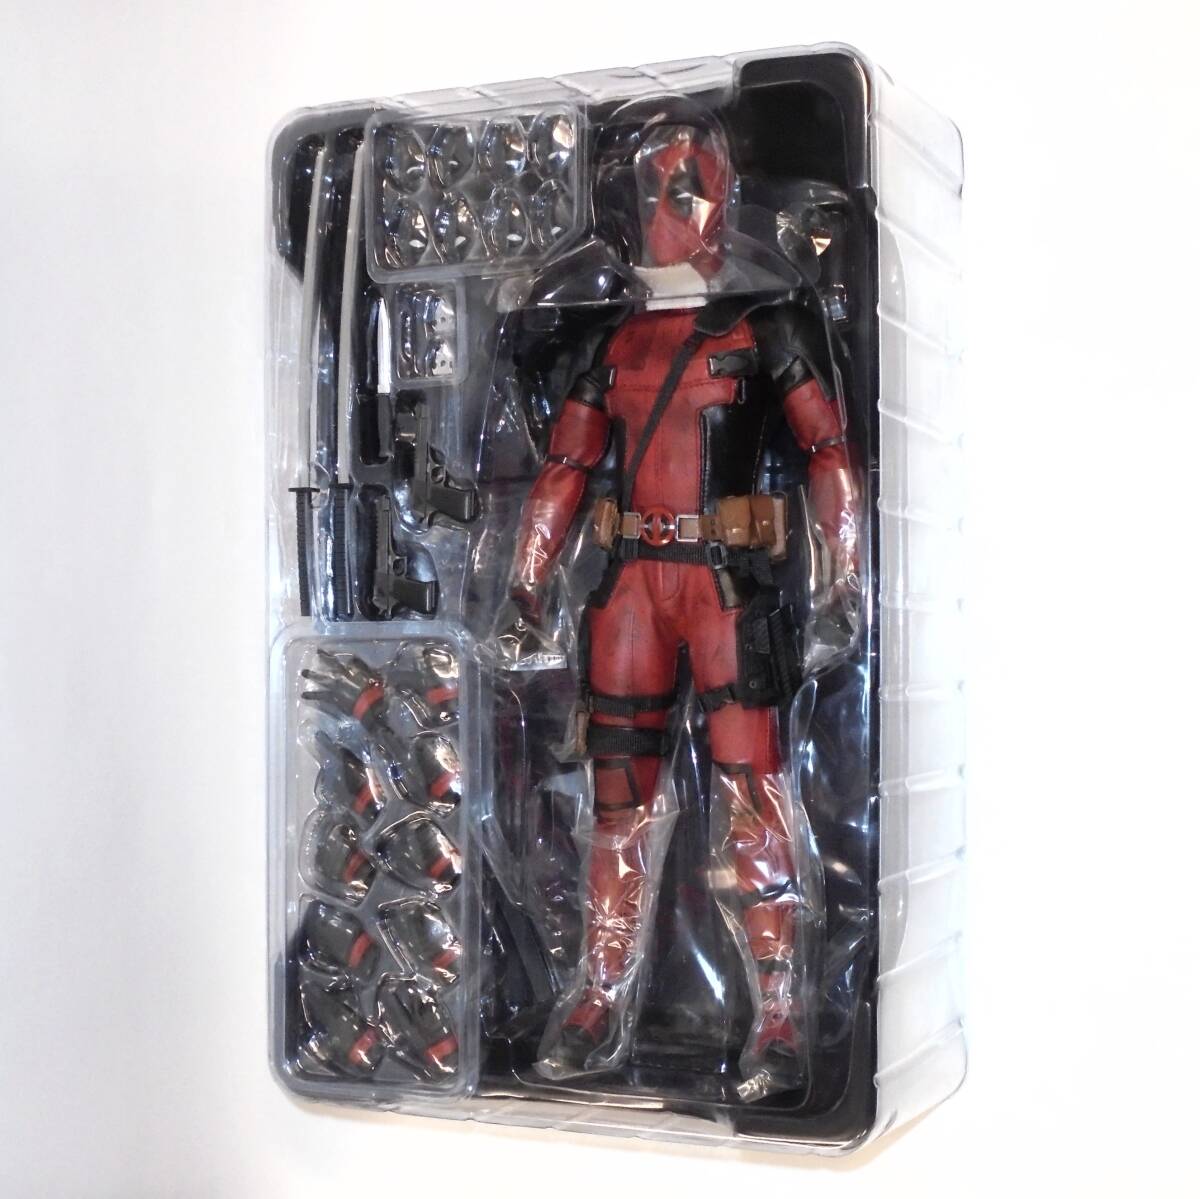  deterioration equipped hot toys dead pool Movie * master-piece 1/6 scale HOTTOYS